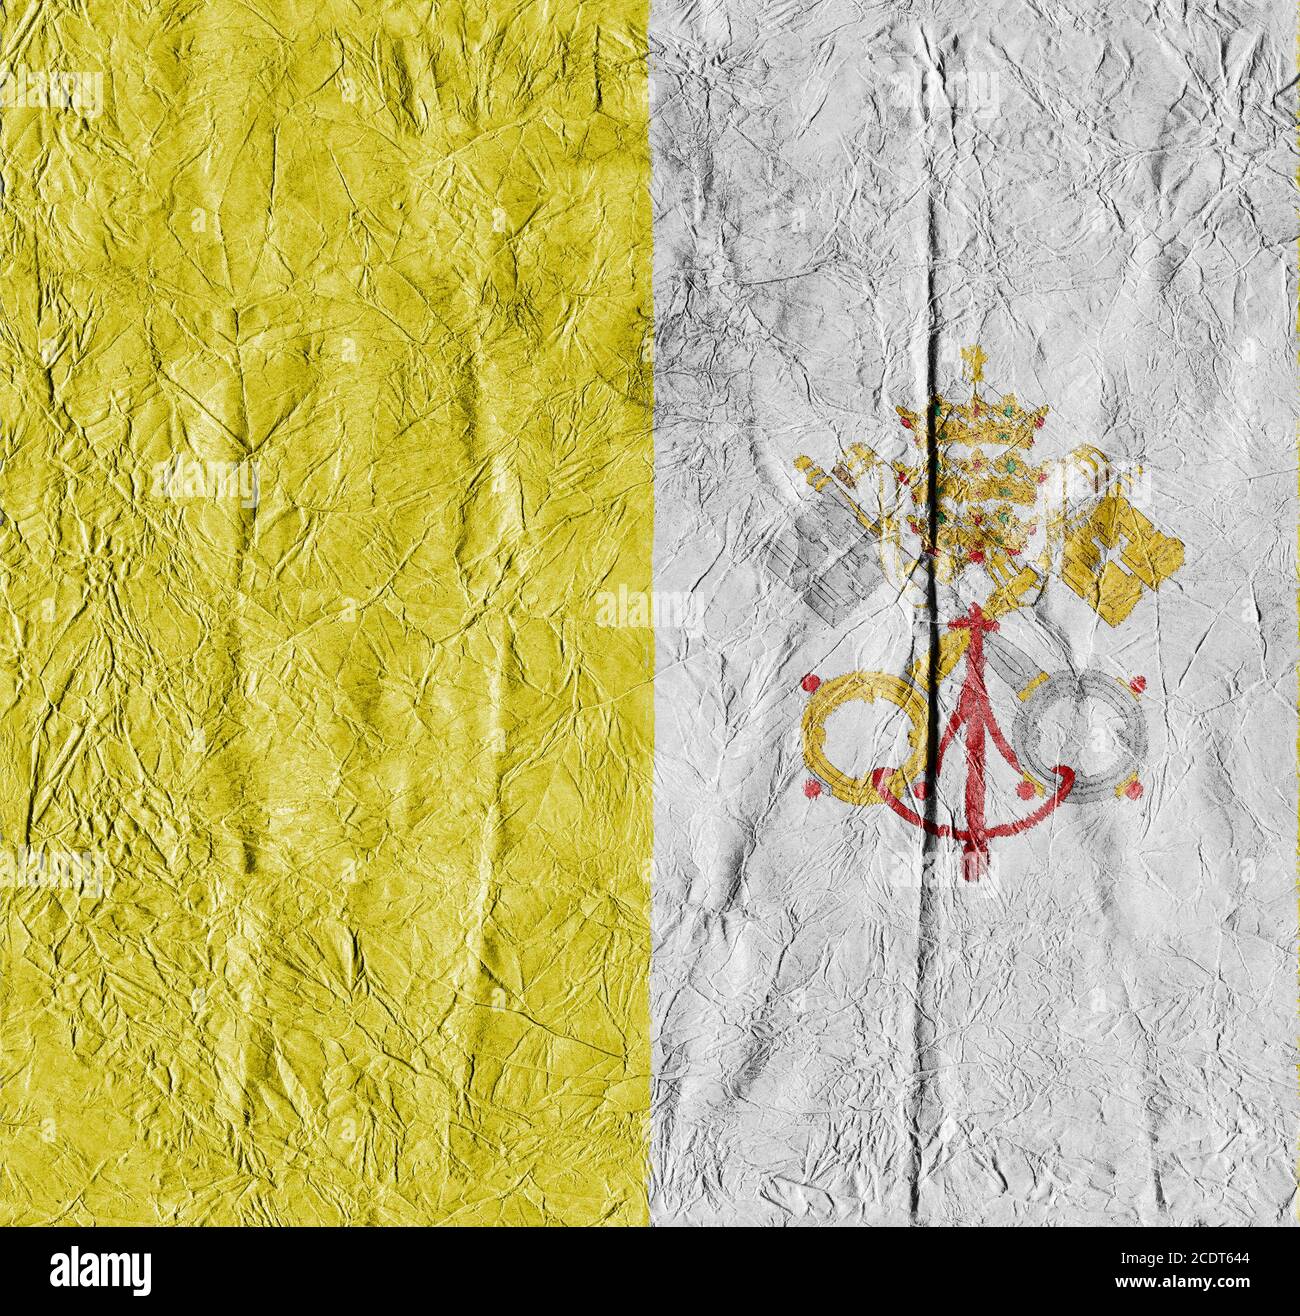 Vatican City flag on a paper in close-up Stock Photo